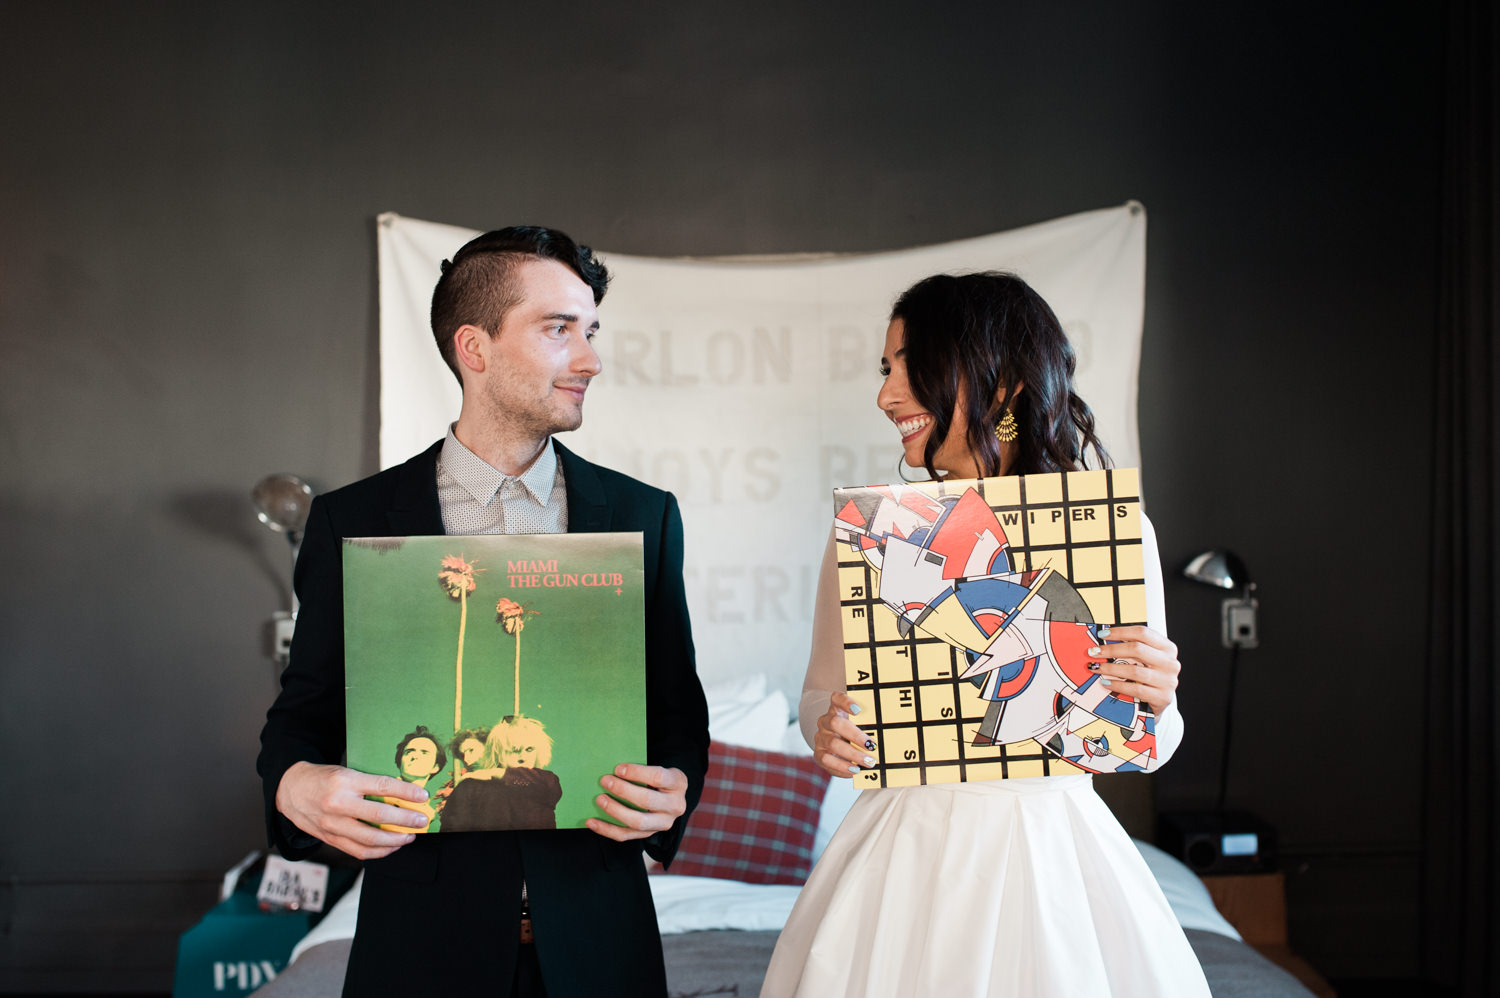 The bride and groom smile at each other from behind their favorite records. by Briana Morrison